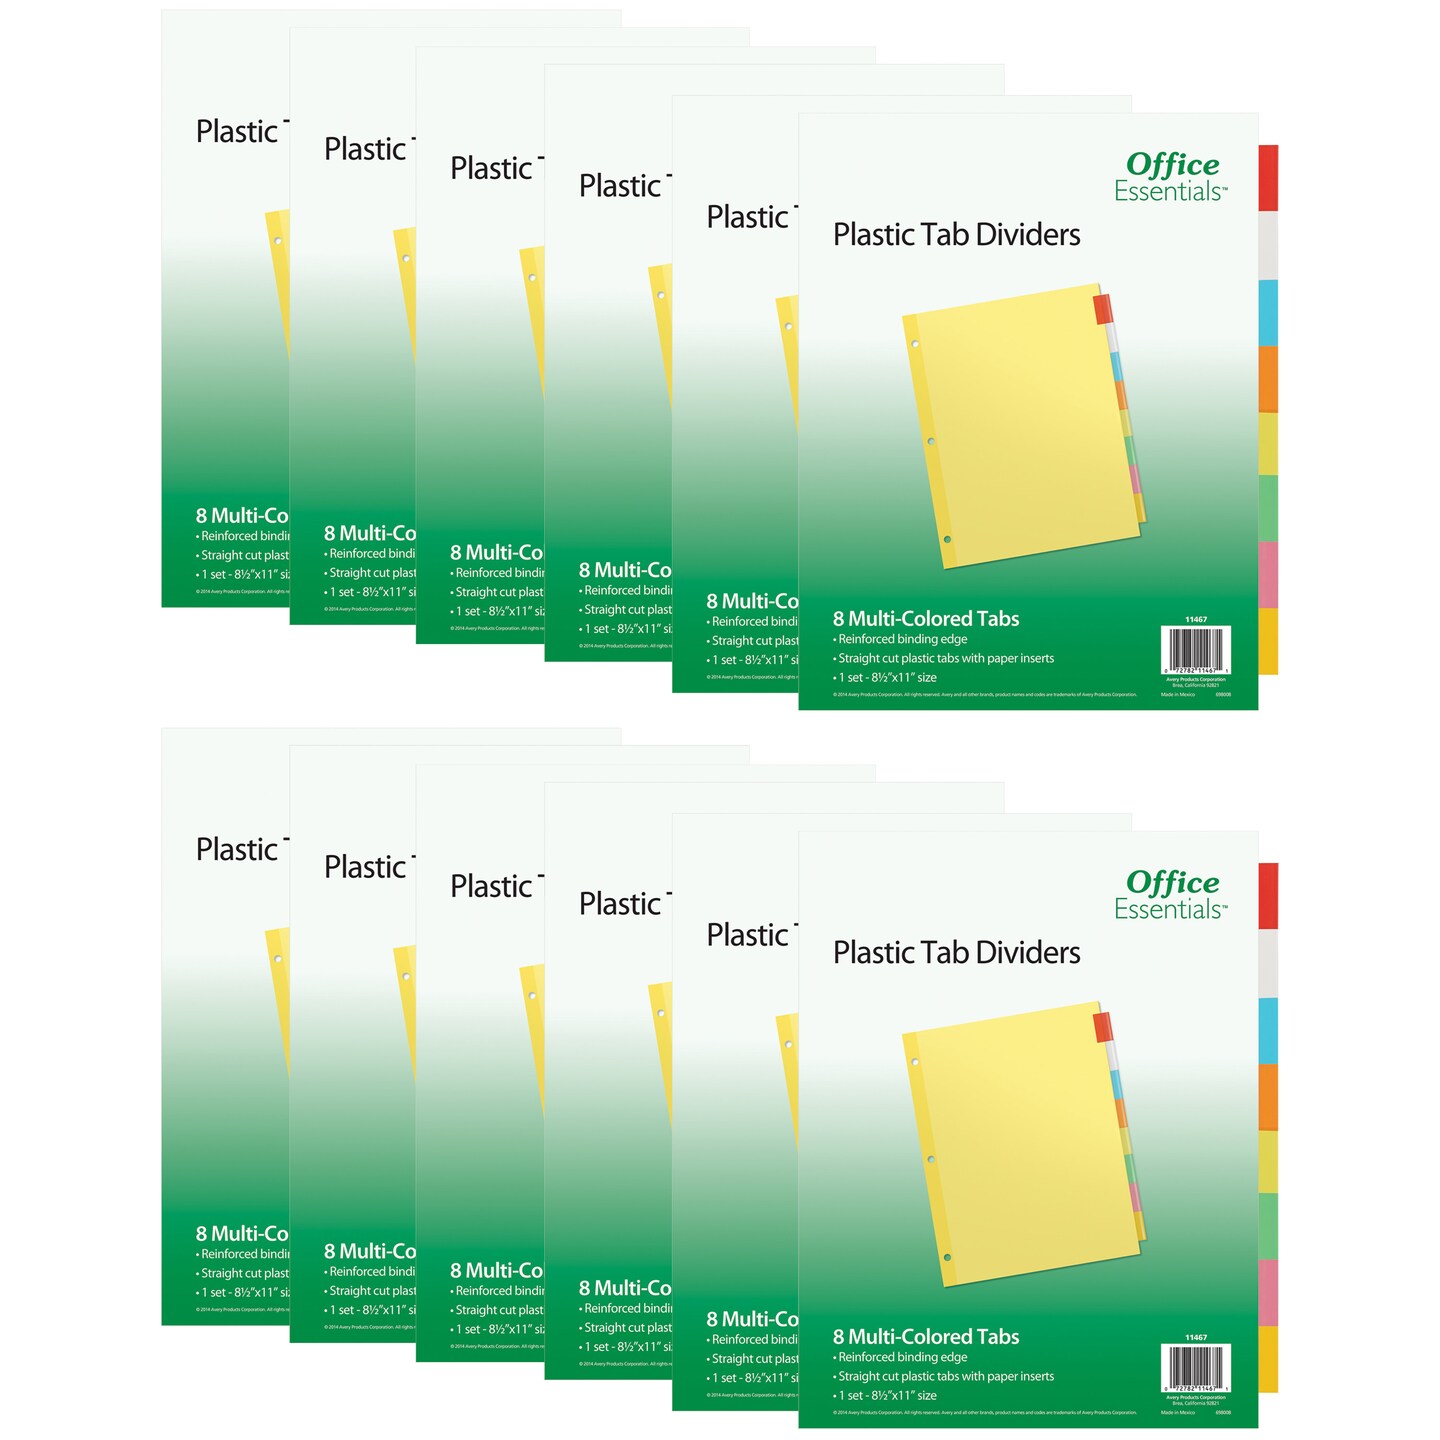 Office Essentials Insertable Plastic Tab Dividers for 3 Ring Binders, 8-Tab Sets, Multicolor Tabs, 12 Sets (21941)